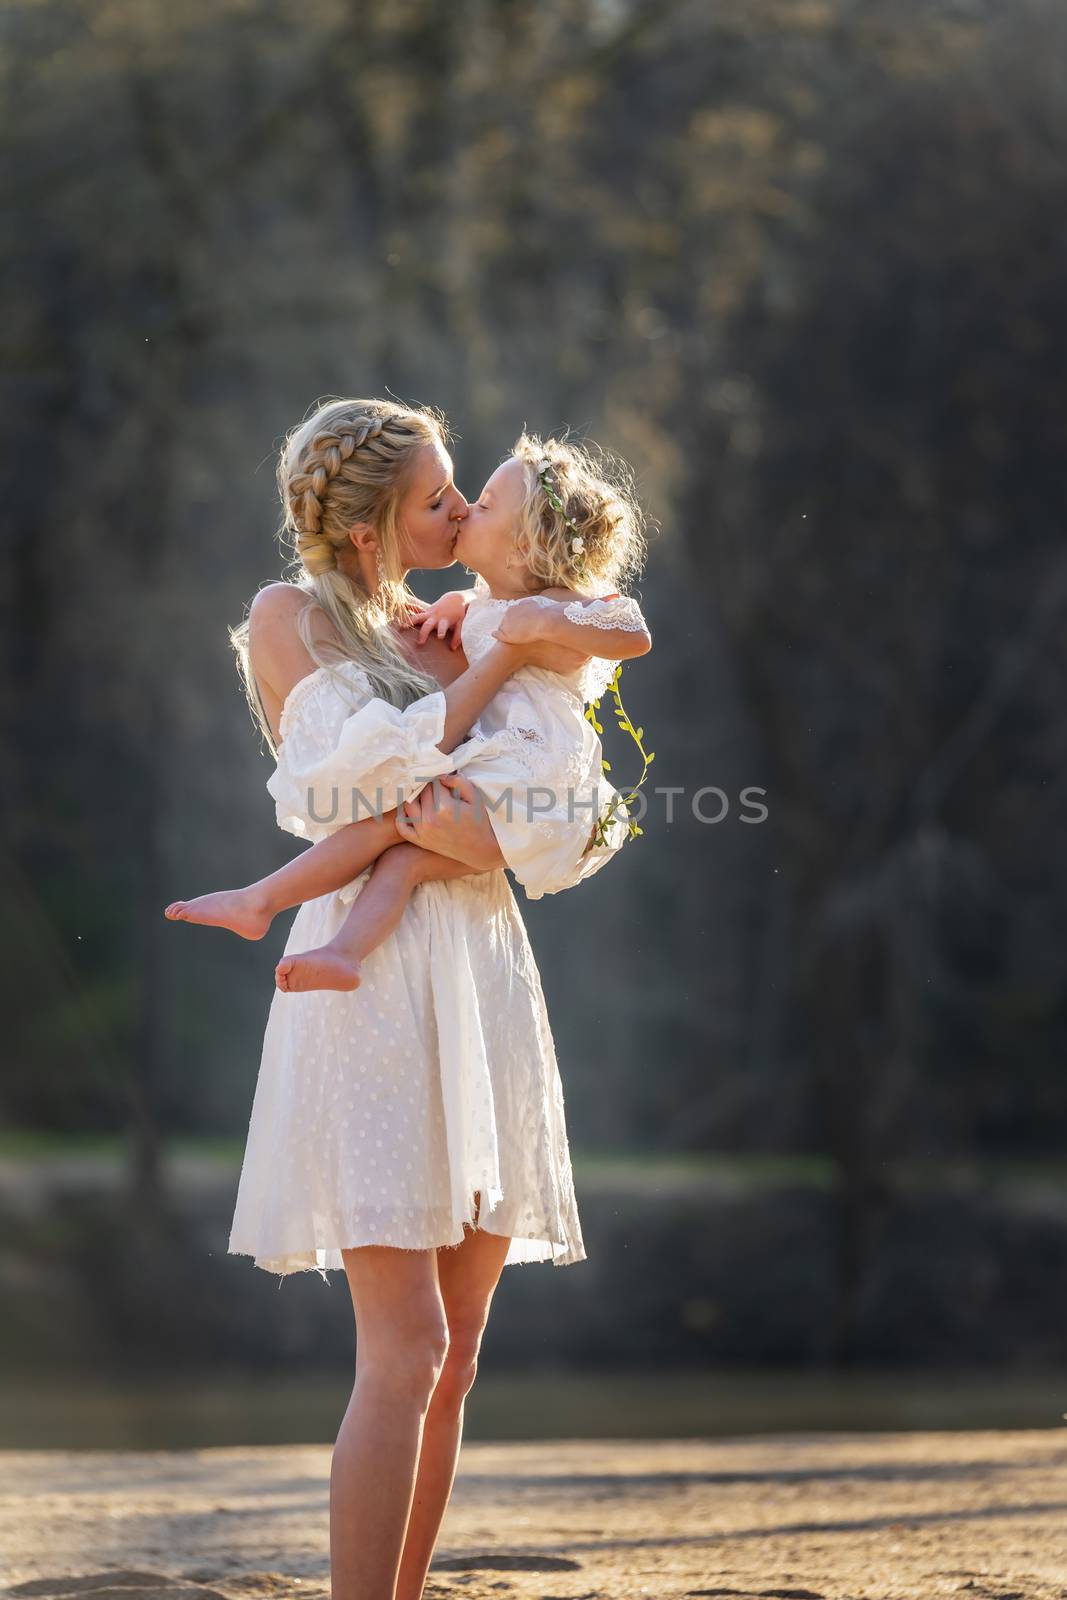 A beautiful young mother and her daughter enjoy the spring weather